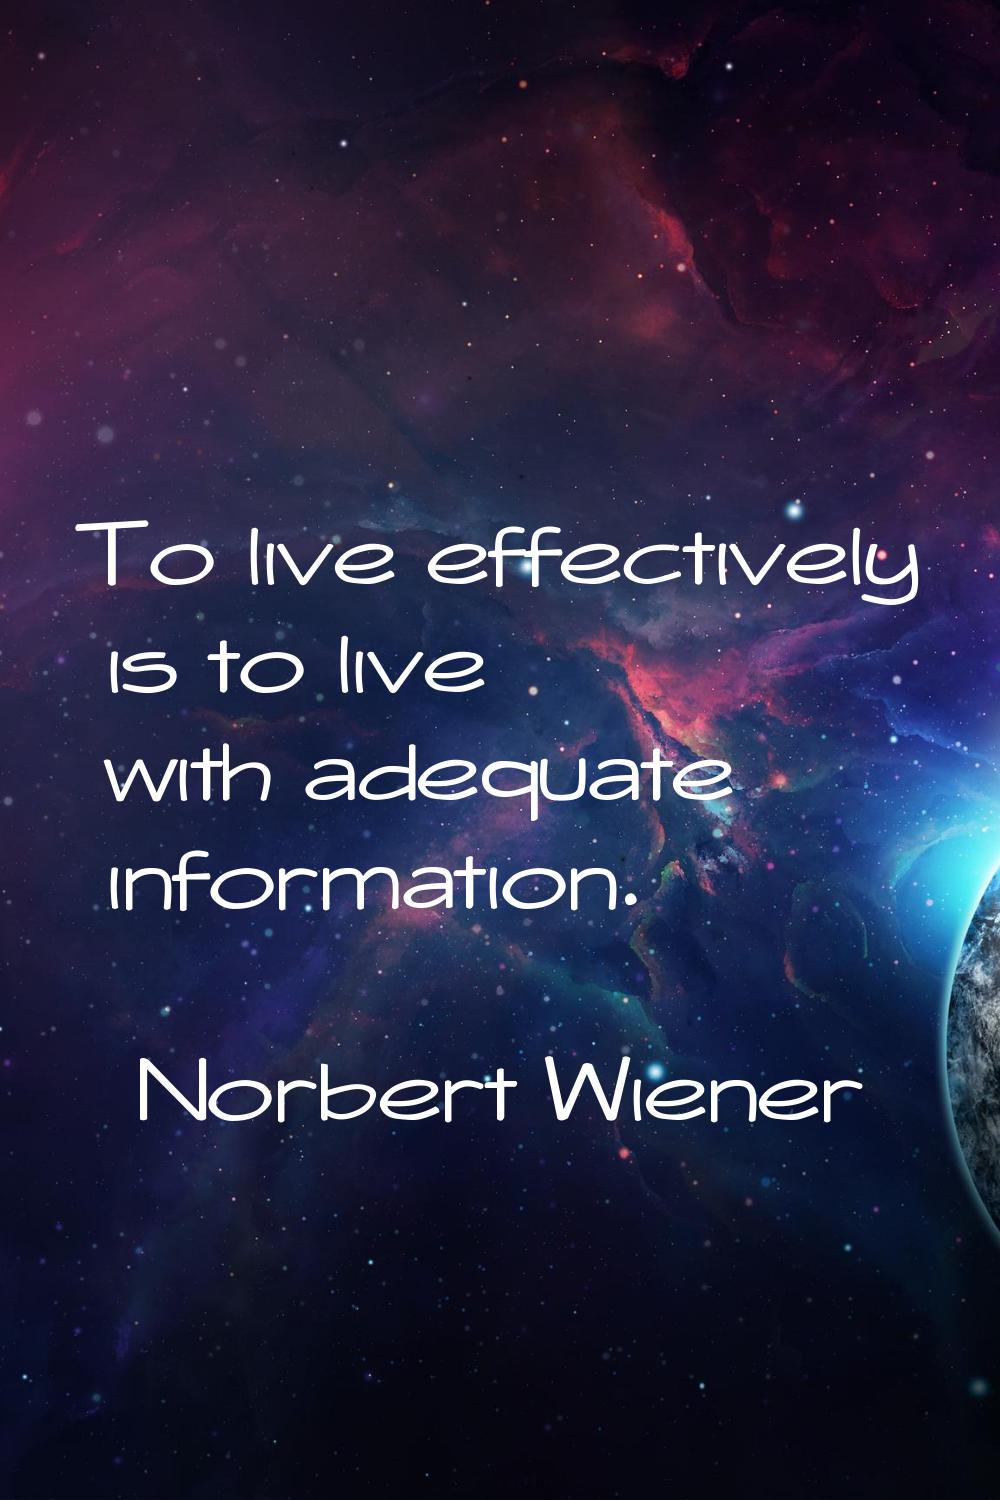 To live effectively is to live with adequate information.